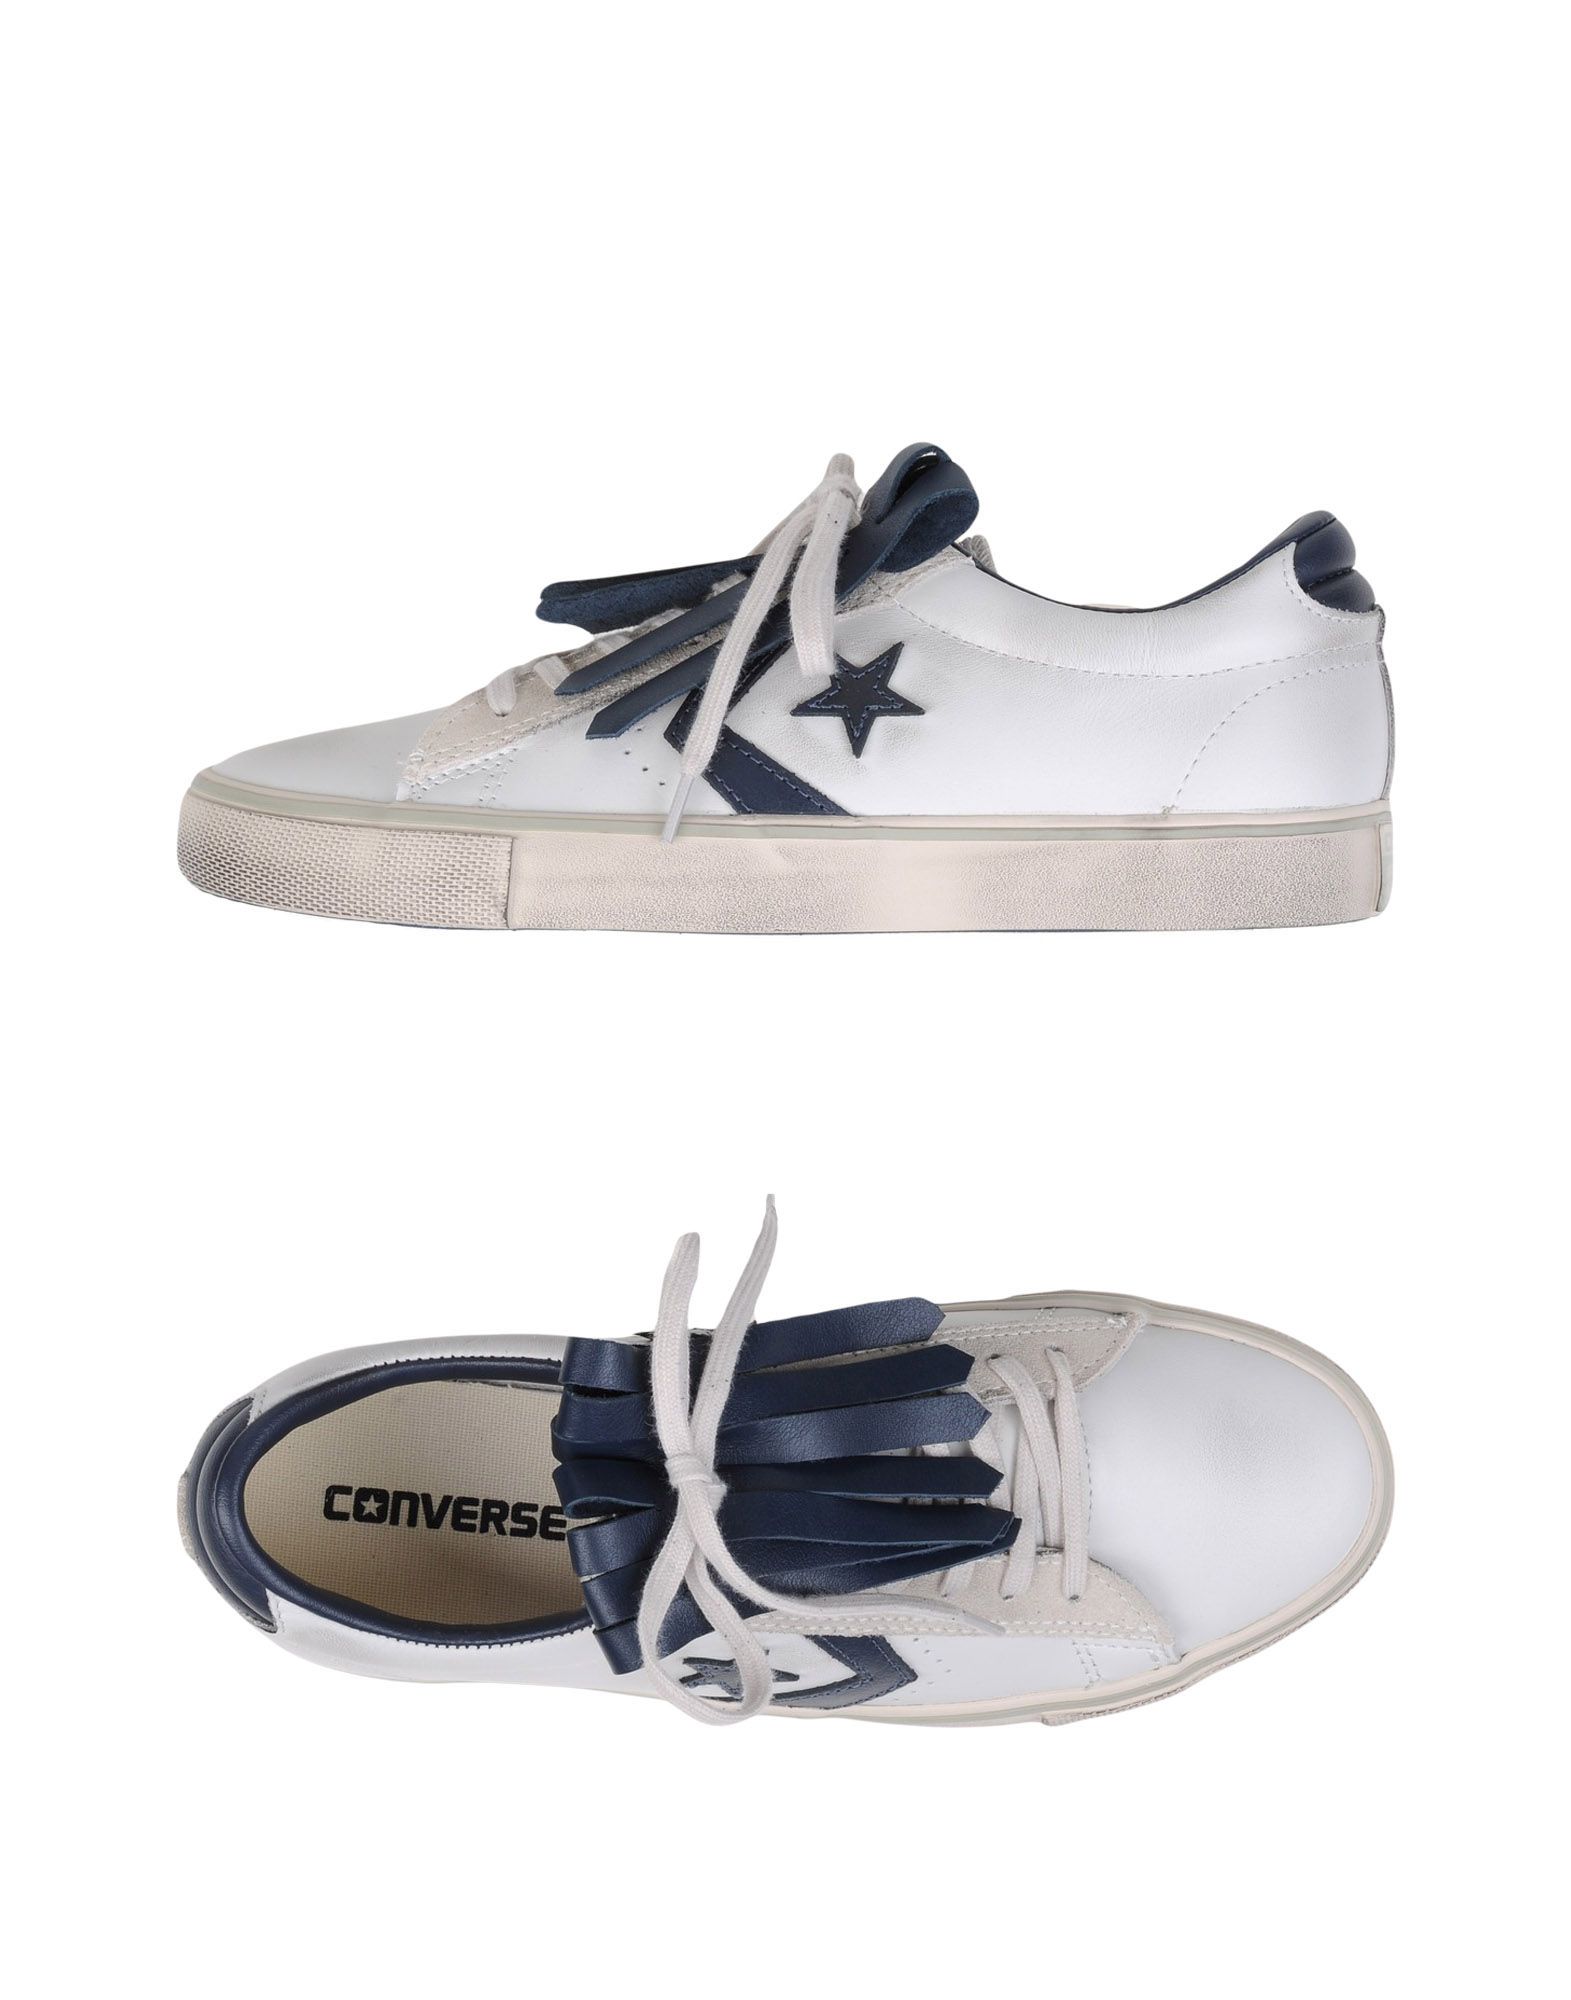 Converse Limited Edition Pro Leather Vulc Ox Leat Ltd - Sneakers - Women Converse  Limited Edition Sneakers online on YOOX Sweden - 11113986BW